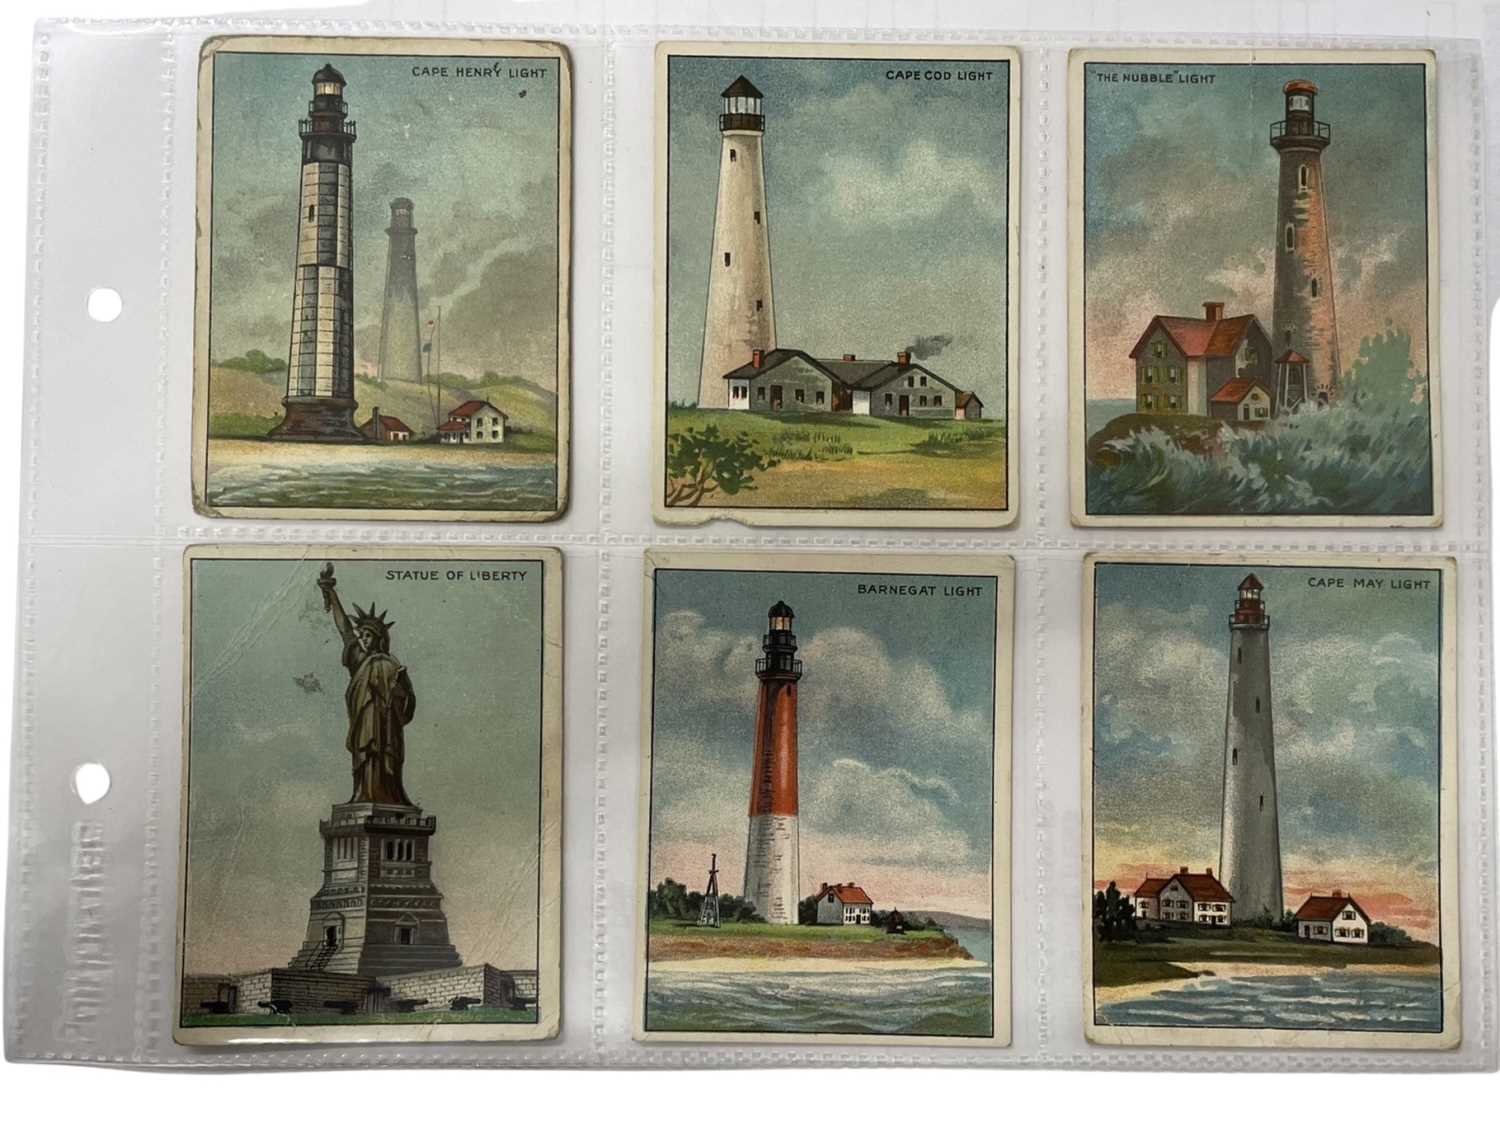 A collection of 20th century cigarette and other collectable cards, of coastal and maritime - Image 5 of 8